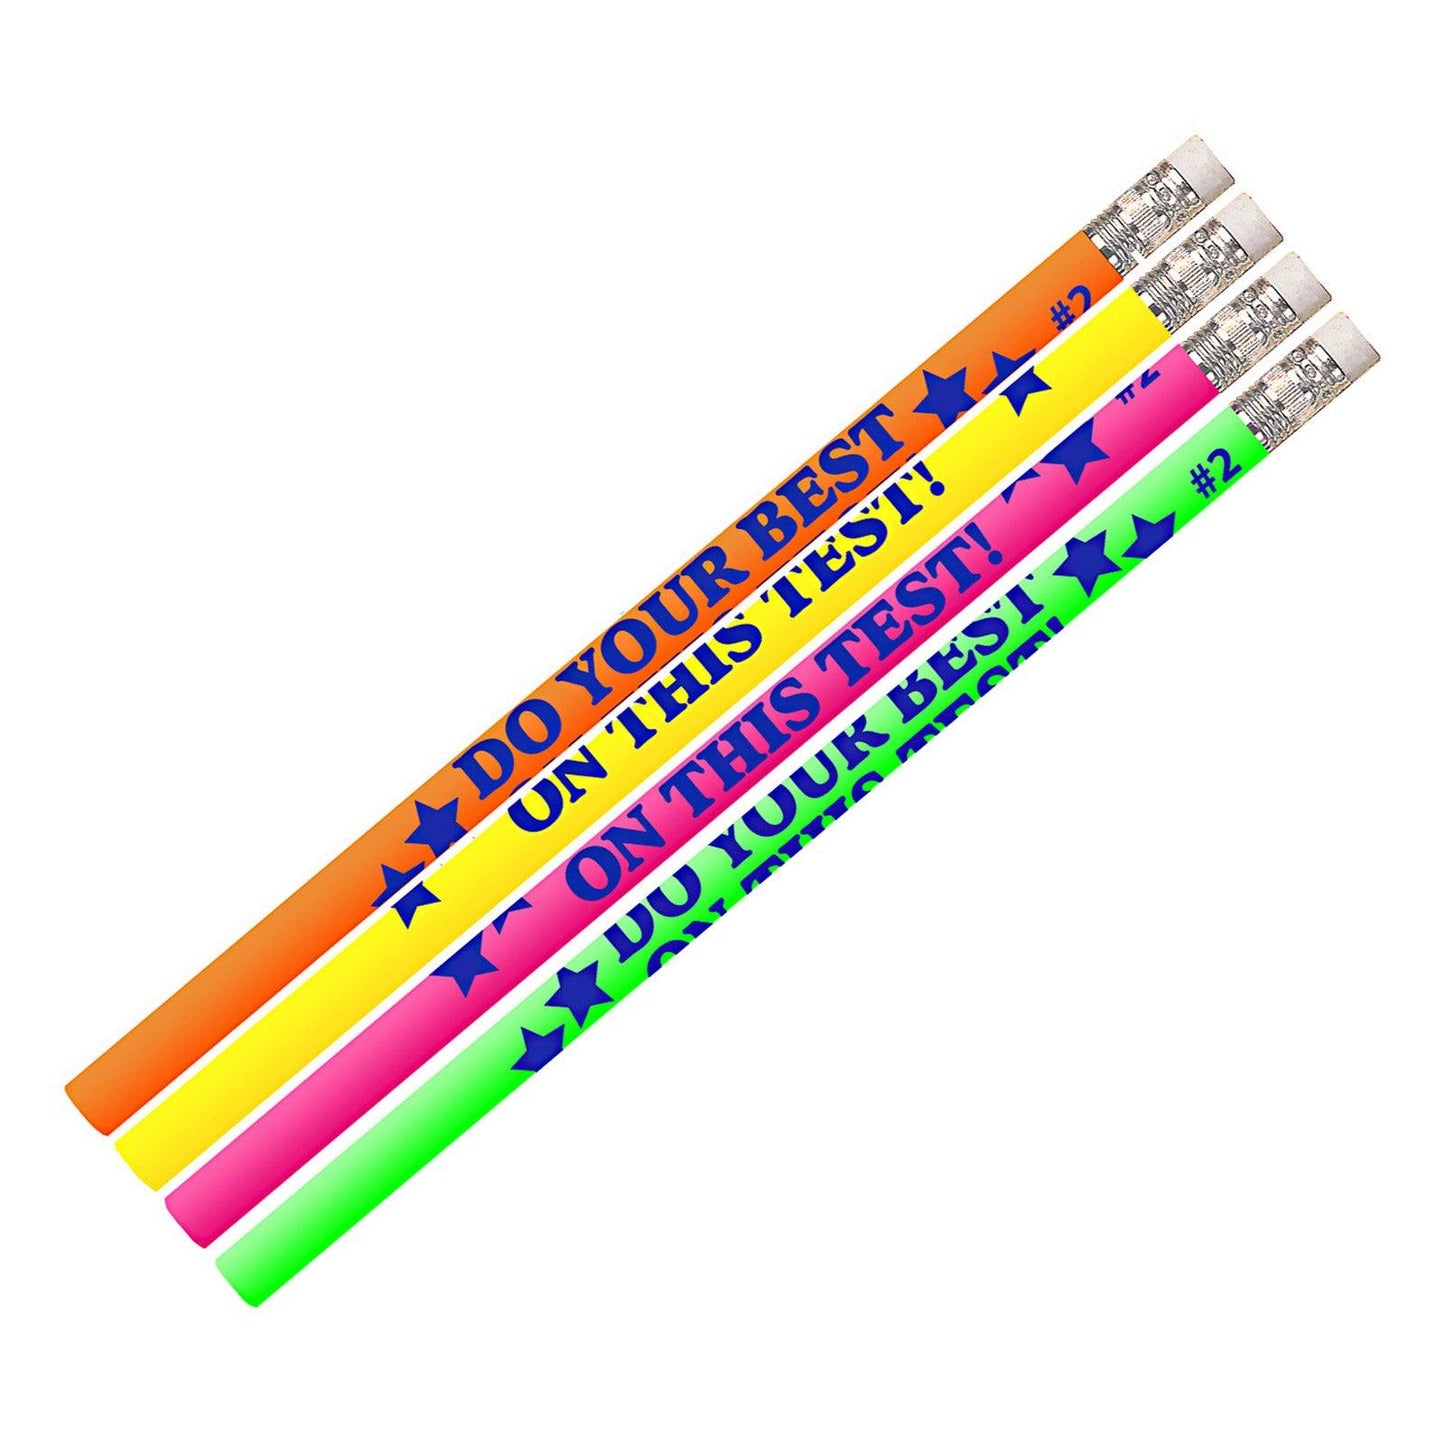 Do Your Best On The Test Motivational Pencils, 12 Per Pack, 12 Packs - Loomini